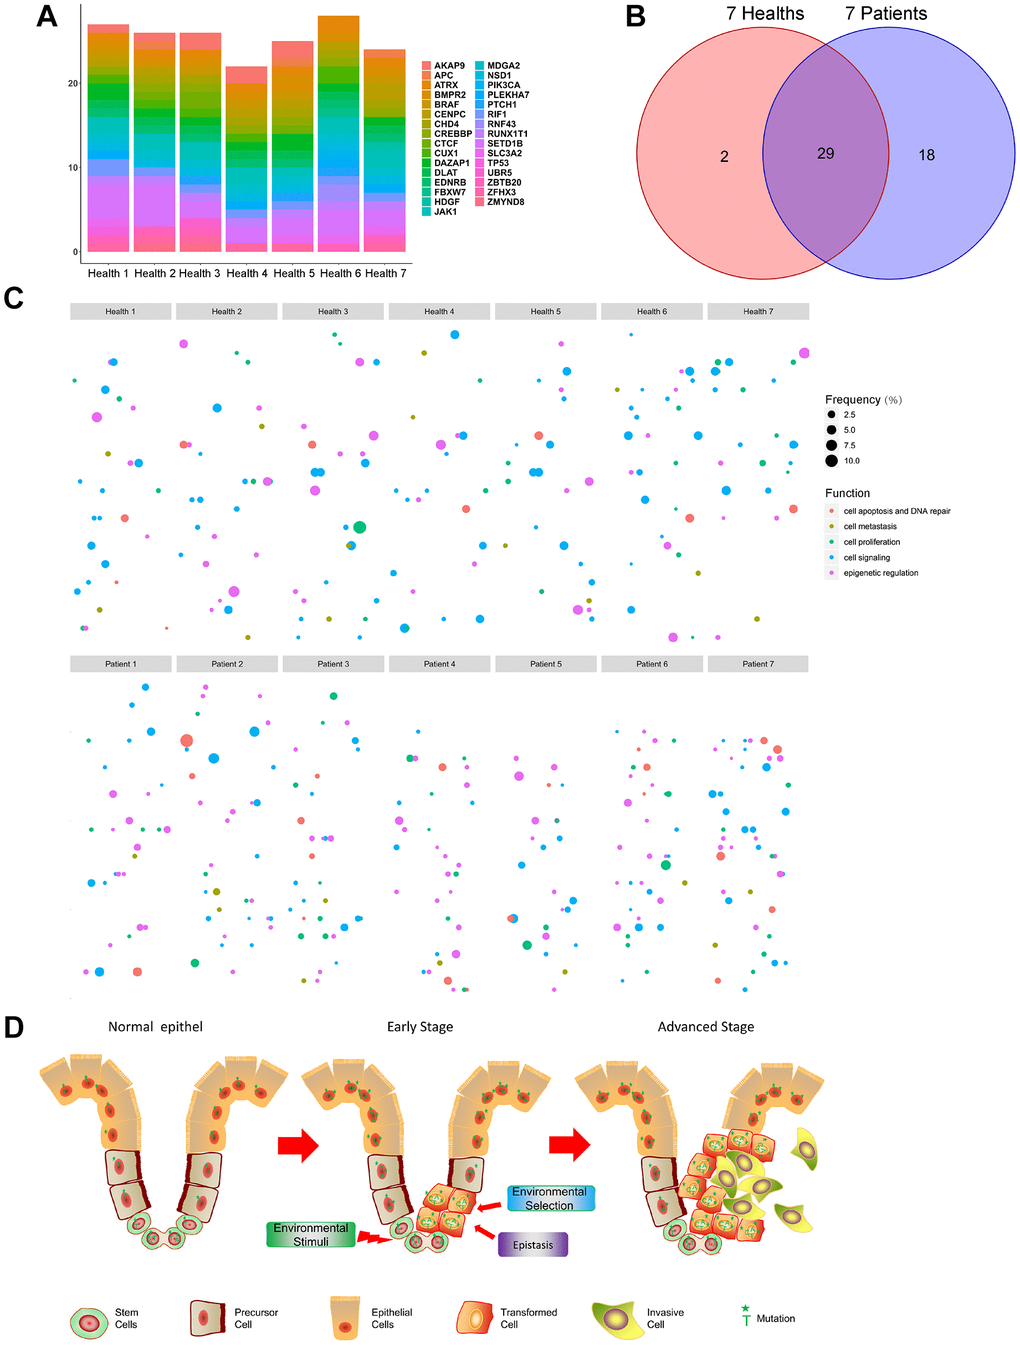 Detecting mutations in normal blood cells from healthy donors. (A) Distribution of selected mutant genes in the seven healthy donors. (B) Wayne diagram of the distribution of mutated genes in CRC patients and healthy donors. (C) Scatter plot of the mutated genes in CRC patients and healthy donors. (D) Schematic diagram. Stem cells in tissues proliferate over years and accumulate mutations. The majority of cells (including stem cells) carry mutant genes (Left). DNA replication and repair and environmental factors (UV, radiation, etc.) lead to the transformation of mutant stem cells into cancer stem cells, while environmental selection and epistasis influence mutations in the tumor (Middle). After continuous iterative selection, cancer stem cells eventually develop into malignant tumors (Right).